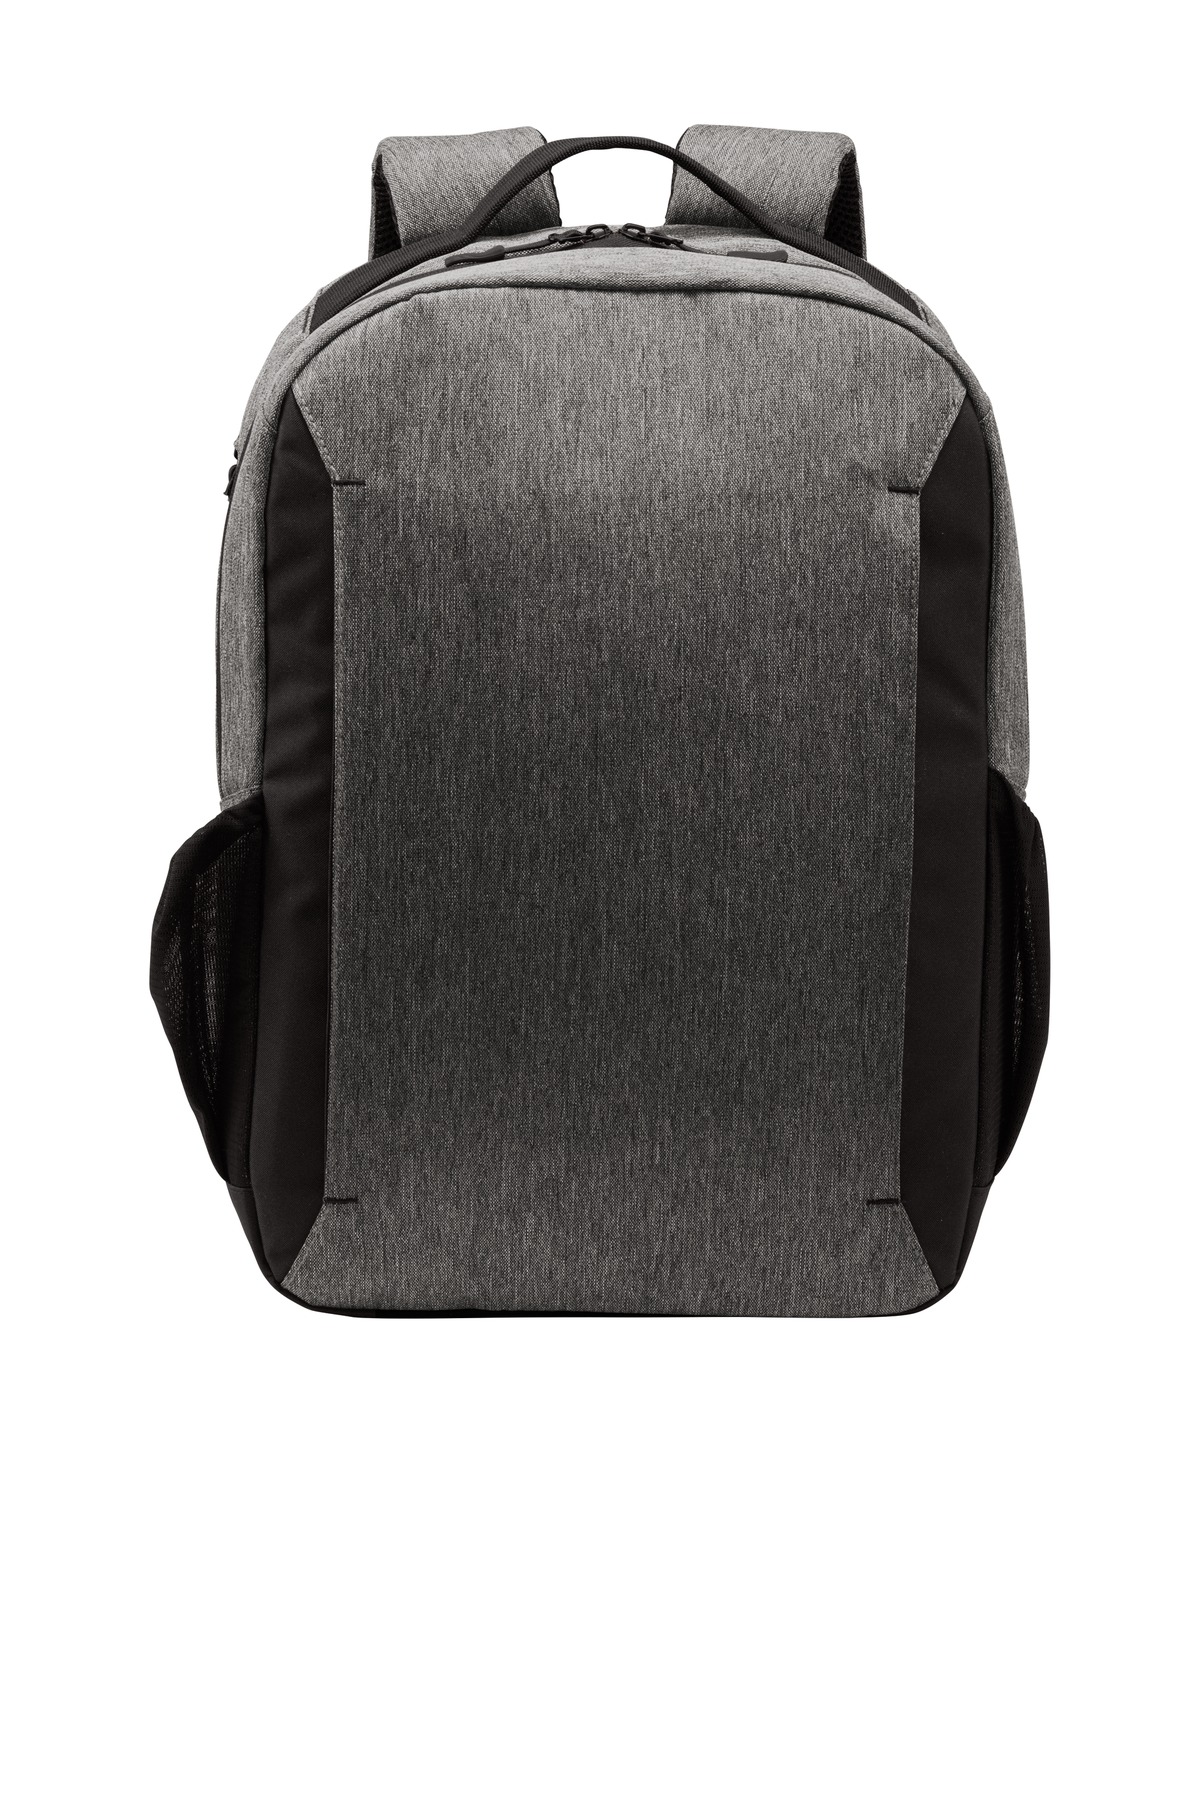 Port Authority Adult Unisex Plain Backpack Grey Heather One Size Fits All - image 1 of 3